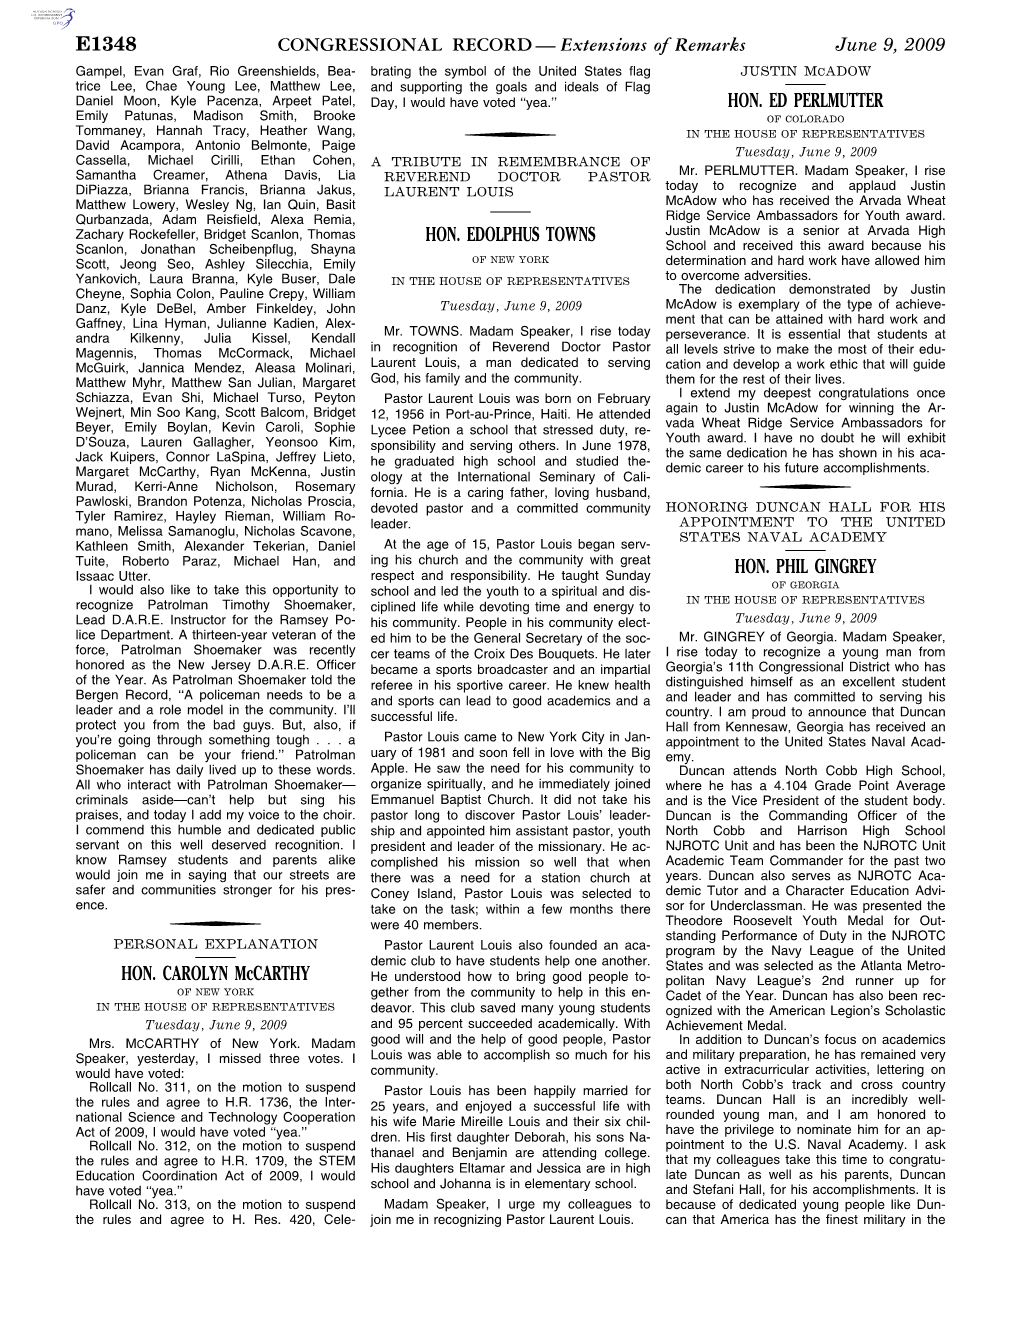 CONGRESSIONAL RECORD— Extensions of Remarks E1348 HON. CAROLYN Mccarthy HON. EDOLPHUS TOWNS HON. ED PERLMUTTER HON. PHIL GINGR